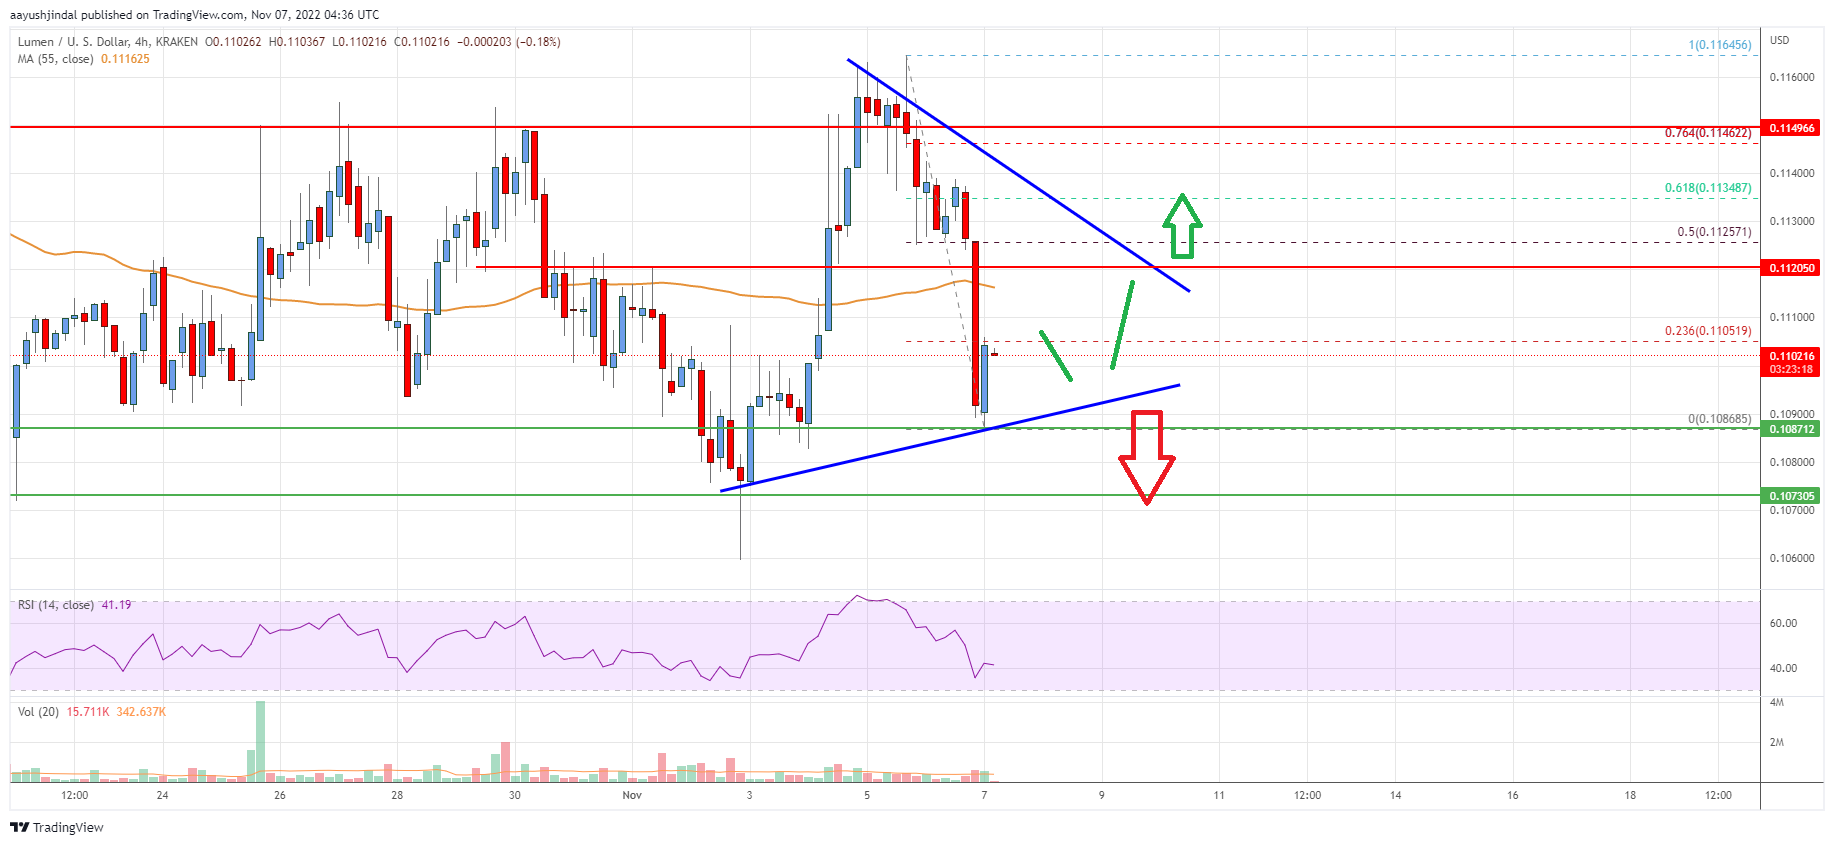 Stellar Lumen (XLM) Price Struggle Continues, Can It Hold This Support?